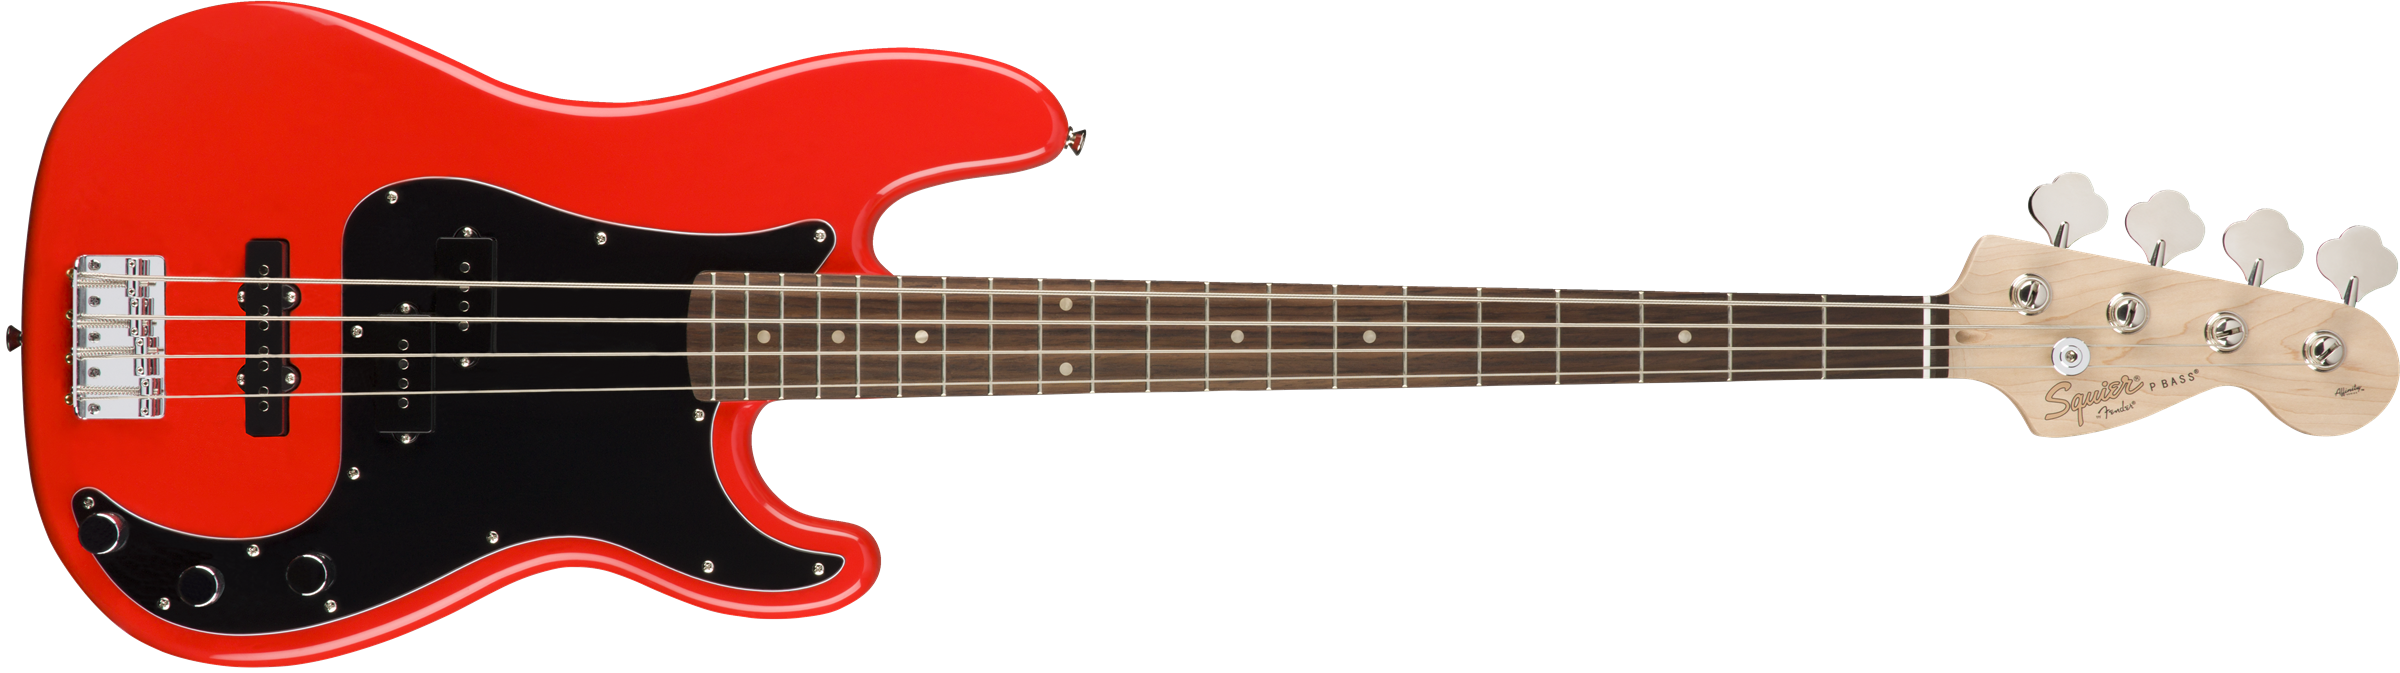 Squier Precision Bass Affinity Series Pj (lau) - Race Red - Solidbody E-bass - Variation 1